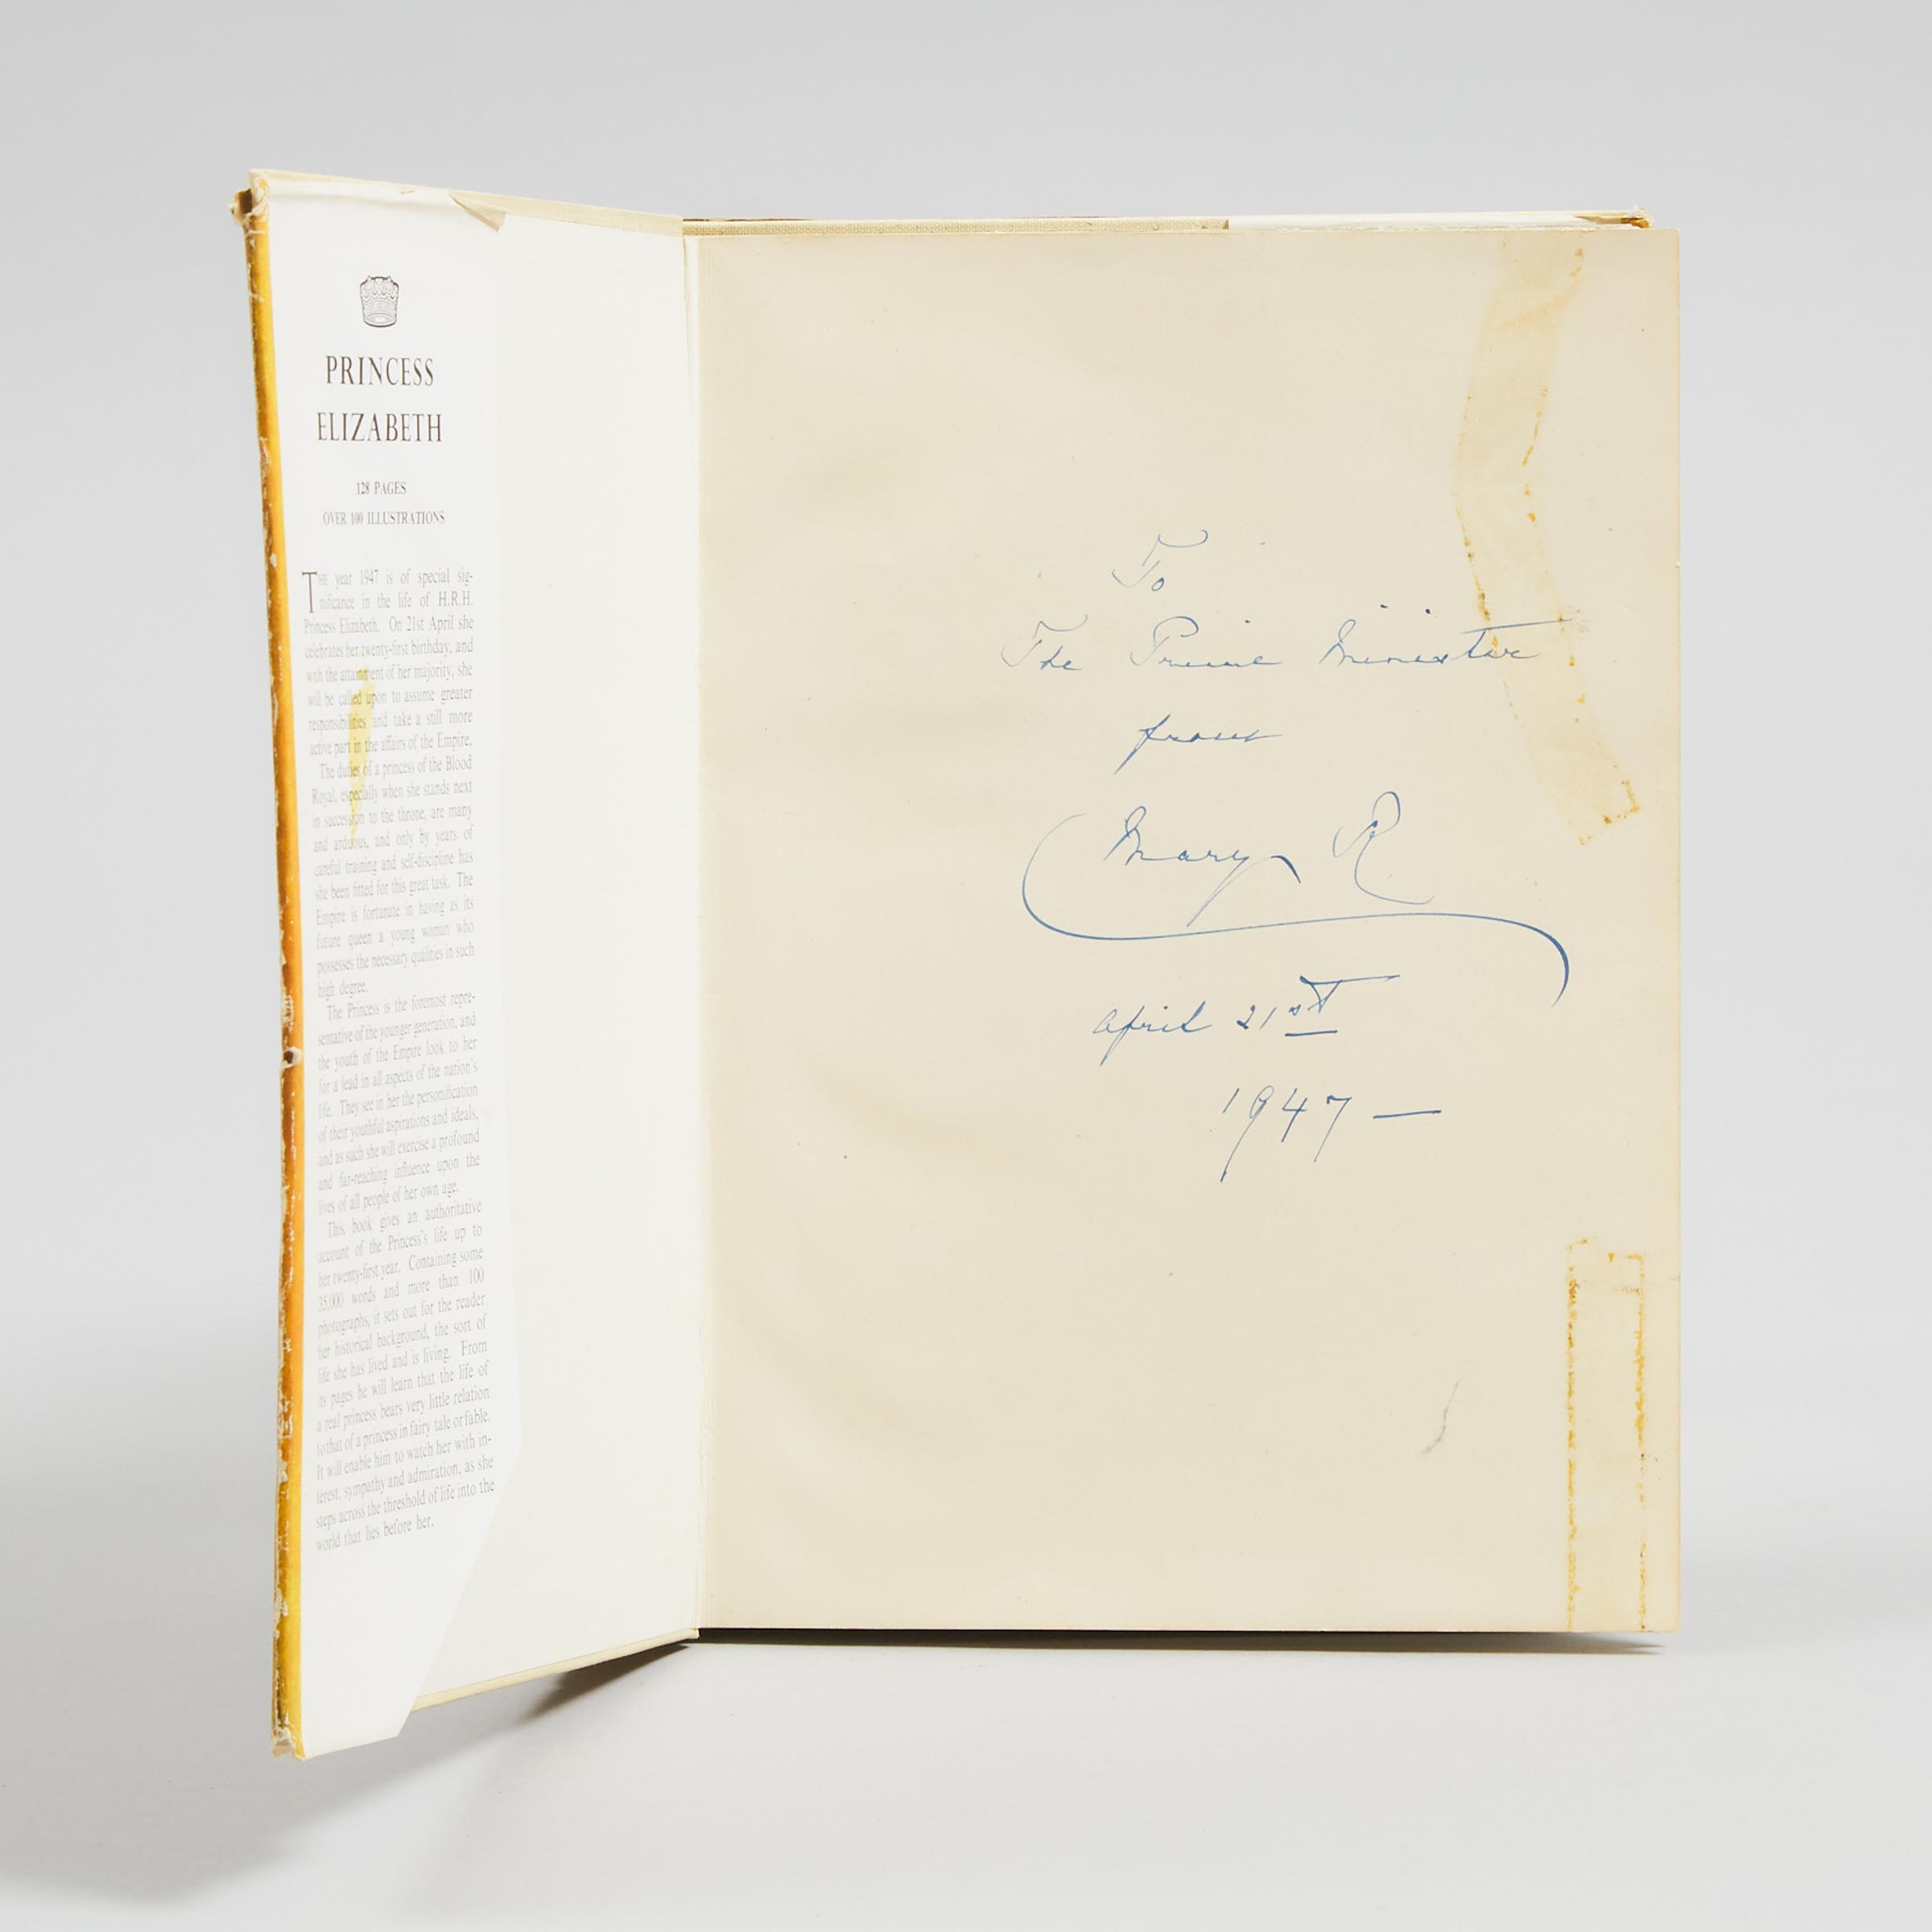 Signed Royal Presentation Copy of 'Princess Elizabeth, the Illustrated Story of Twenty-One Years in the Life of the Heir Presumptive', 1947